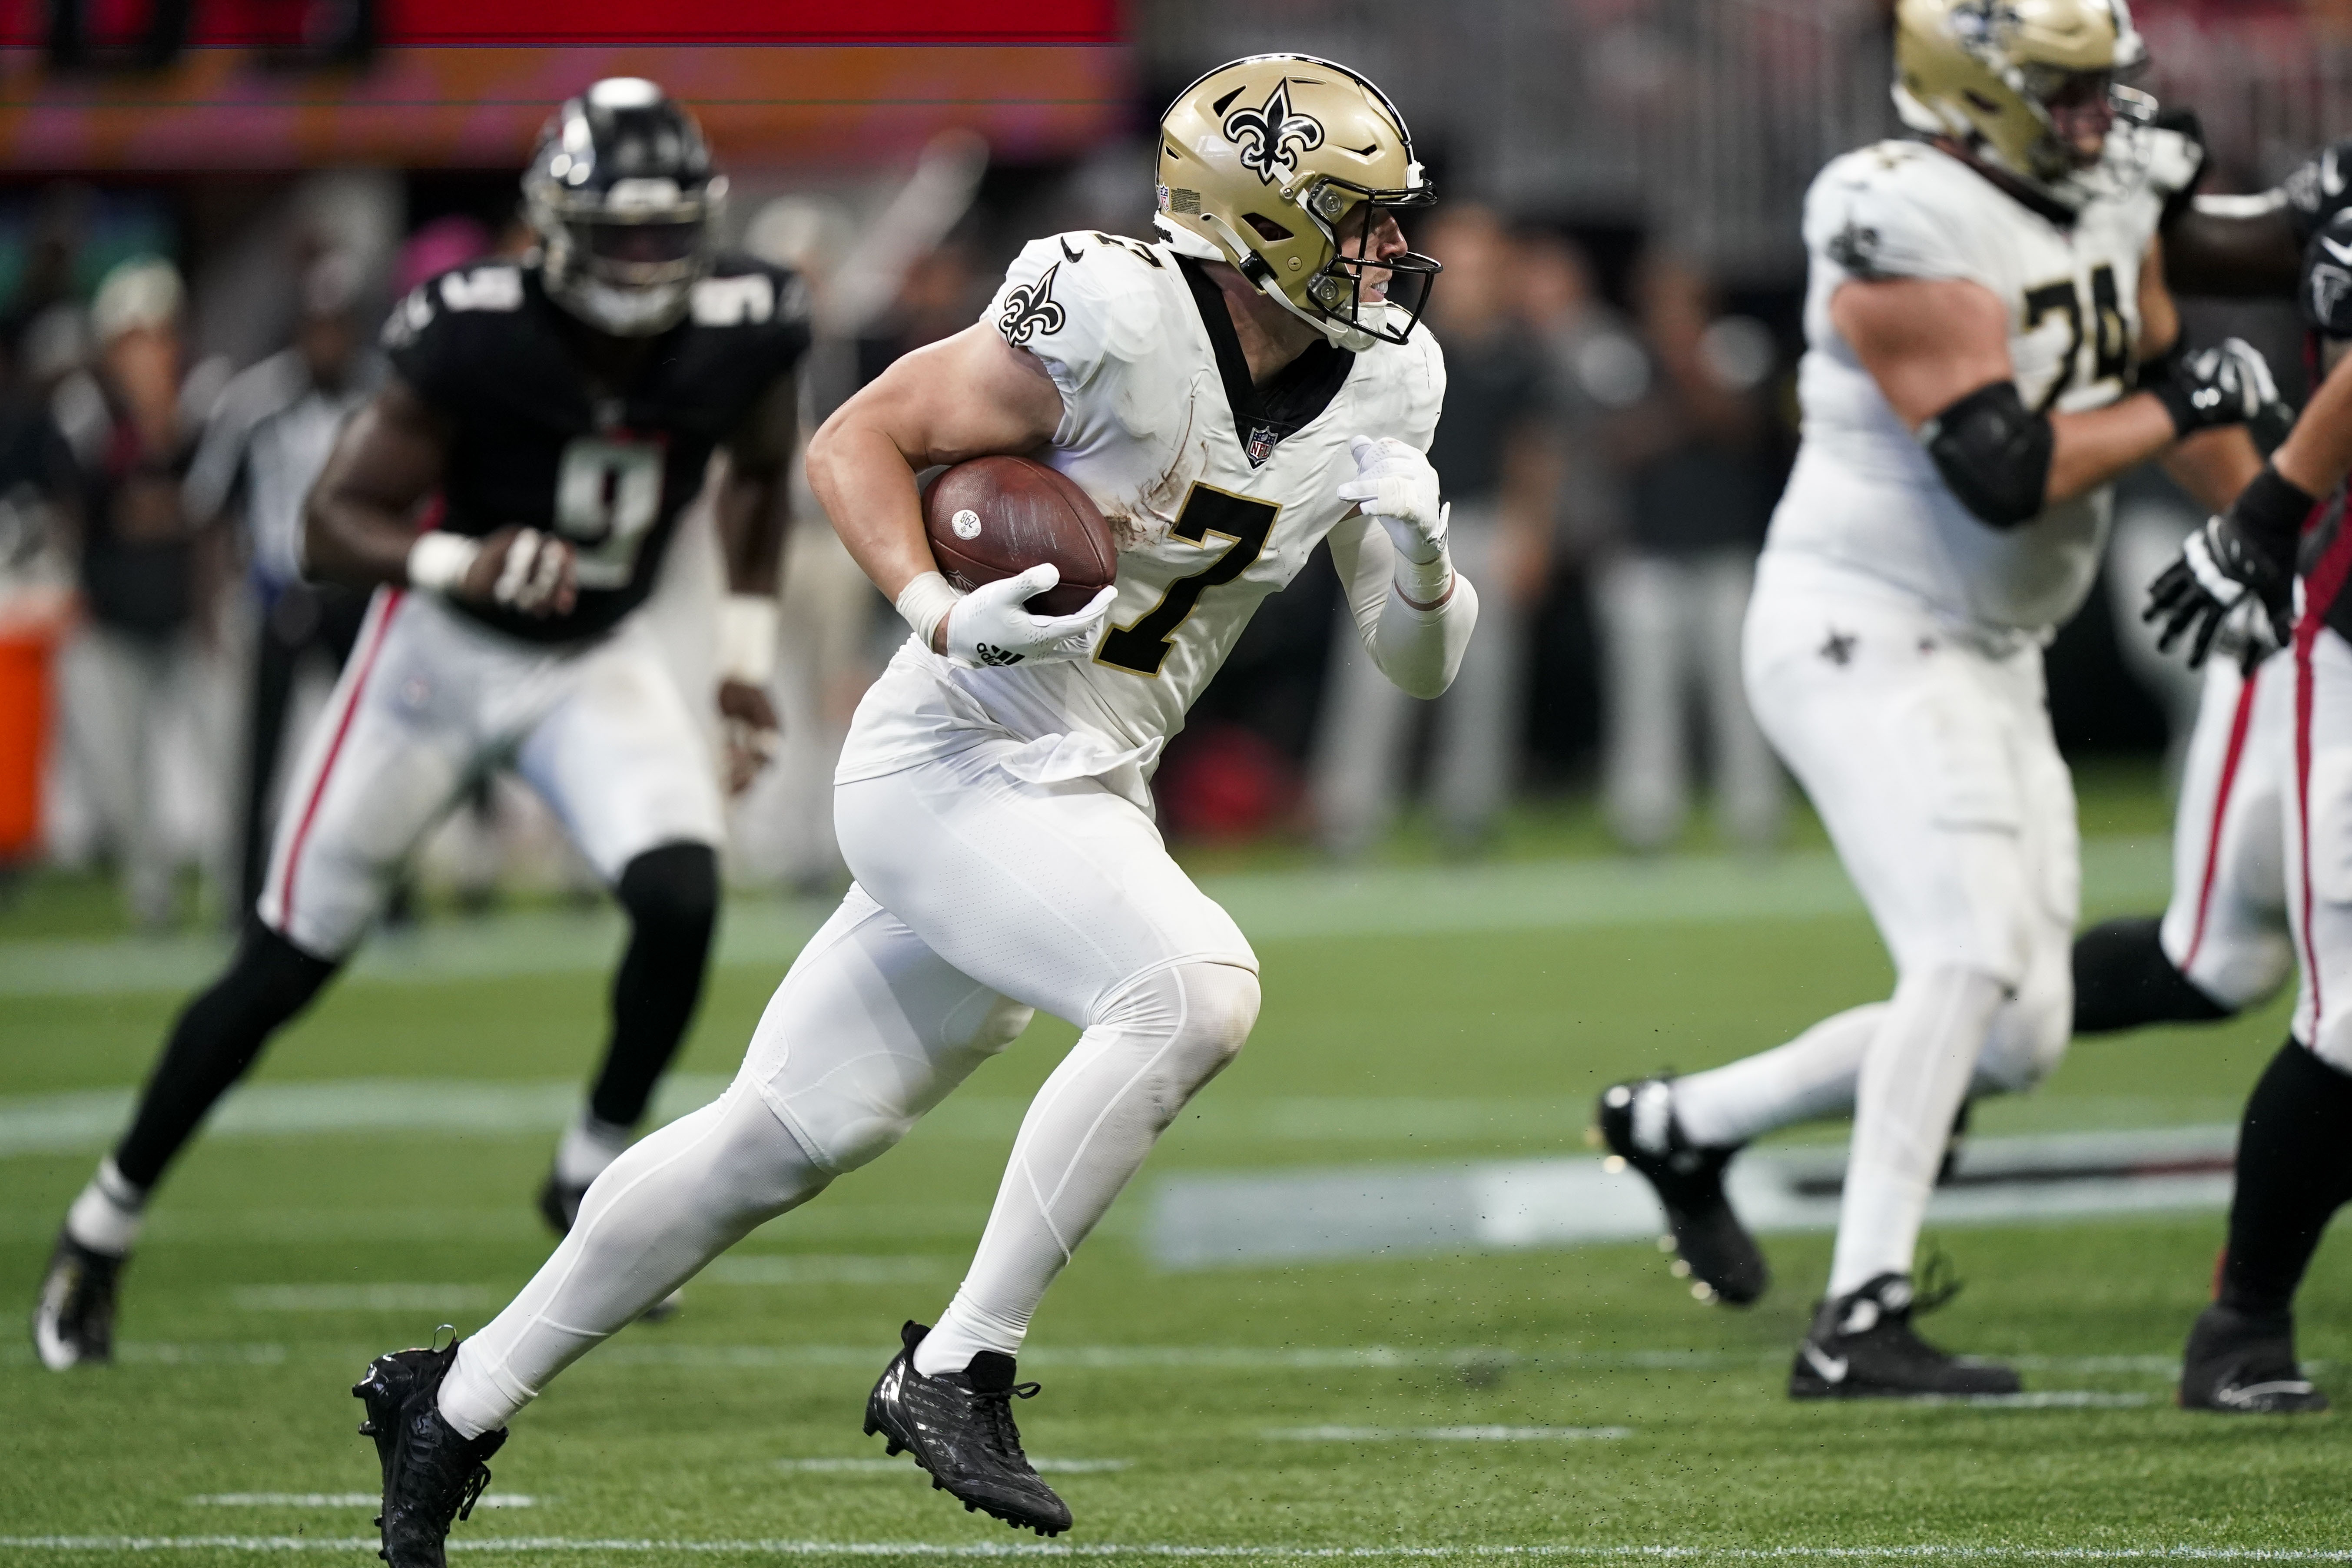 Saints Complete Wild Comeback, Beat Falcons 27-26. - Canal Street